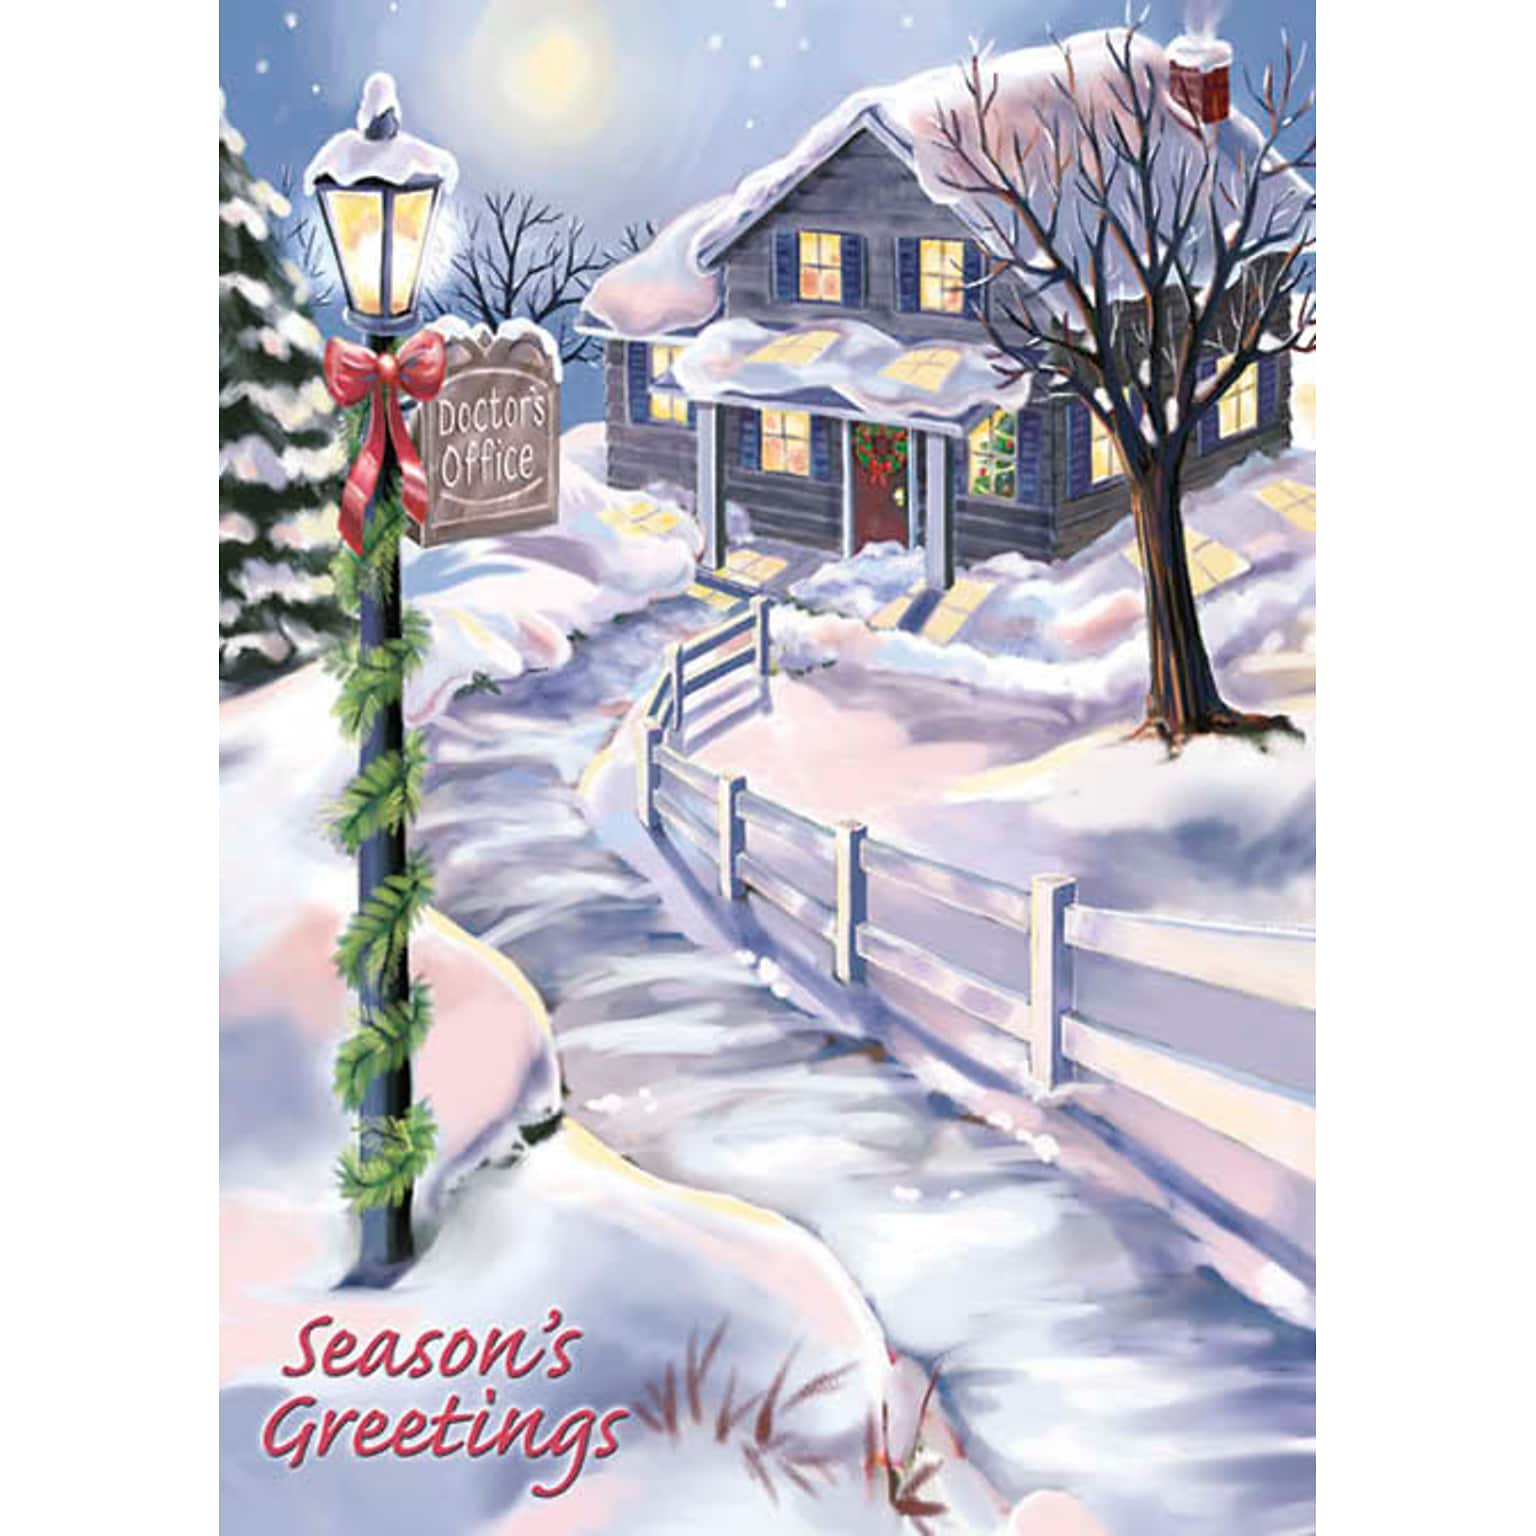 Seasons Greetings Doctors Office Holiday Greeting Cards, With A7 Envelopes, 7 x 5, 25 Cards per Set